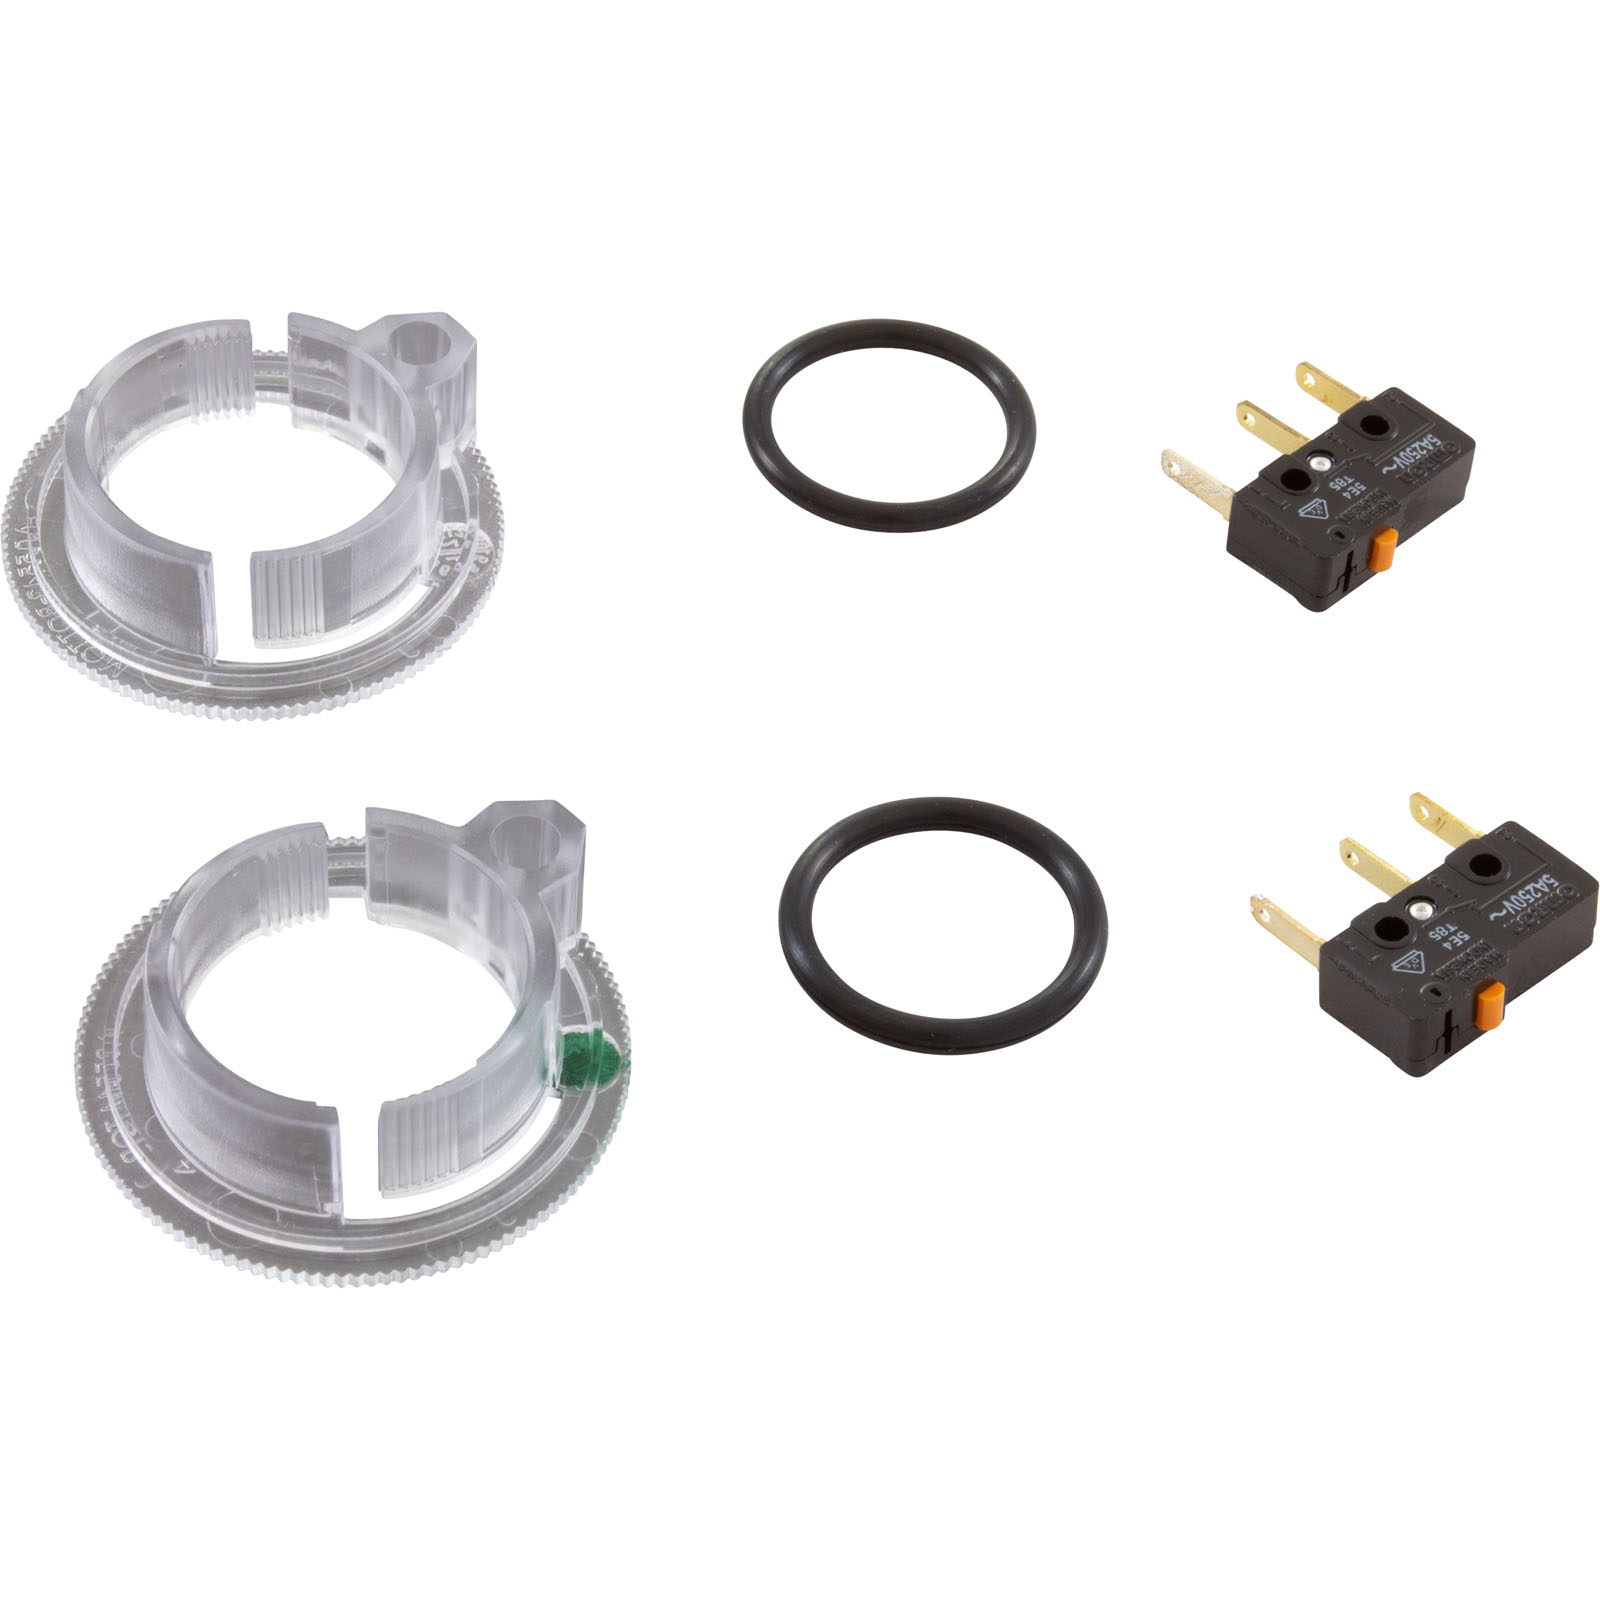 Picture of Microswitch Kit, Zodiac Jandy Valve Actuator, w/ Cams